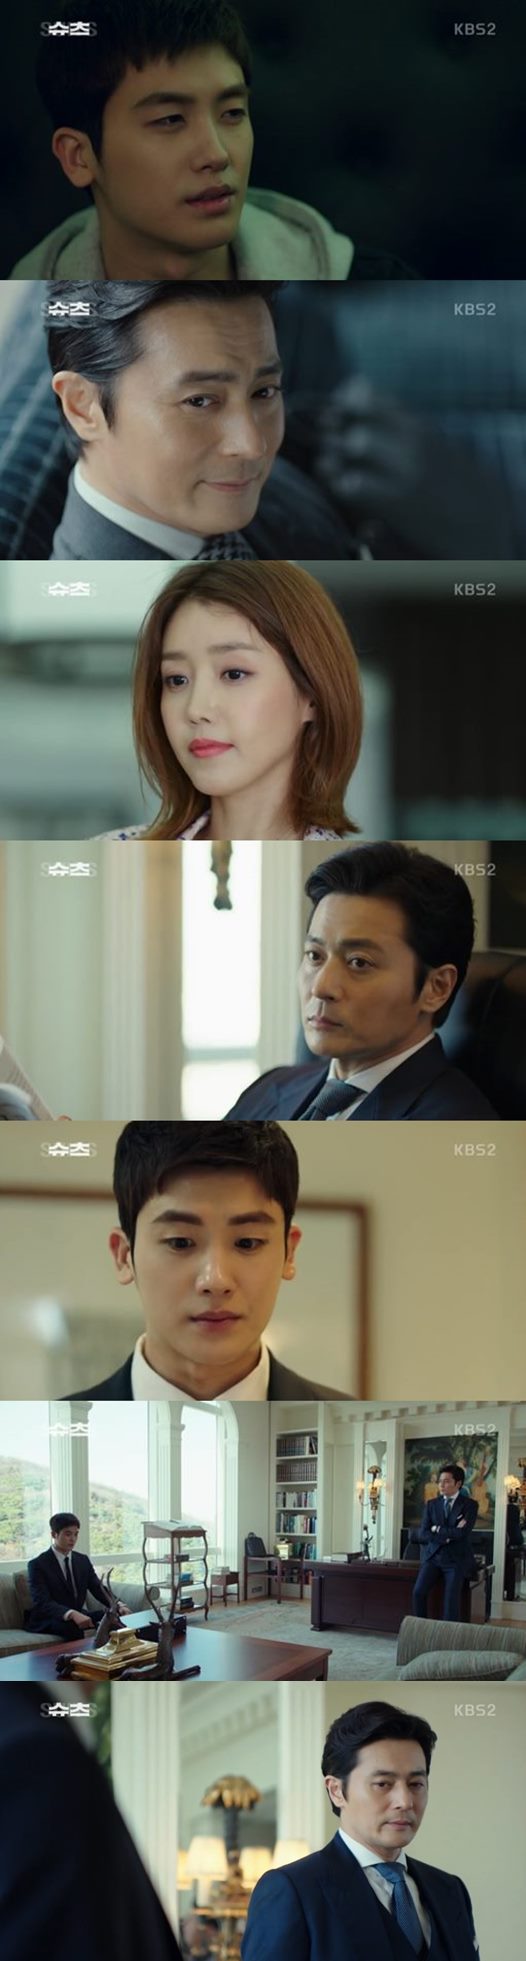 Suits did not drop viewers immersion for a minute throughout the dramas 60-minute run with a sense of sensational and trendy metabolism.The skill of Jang Dong-gun, who refined all the performances, and the Chemie of Park Hyung-sik, a young and fresh blood, were a gift. In the first KBS2 drama Suits (playplaywright Kim Jung-min and director Kim Jin-woo), which was first broadcast on the night of the 25th, Choi Kang Suk (Jang Dong-gun) and a lawyer of Korean law firm legends, The opening of the opening of the Bromance Prelude by the high-emory Yeon Woo (Park Hyung-sik). In addition to the intense sentence It is Choices, not Woo Yeon Yi, which determines fate, Choi Kang Suk was shown to find the high-yeon Woo in prison.Why did Yeon Woo go into prison, and what kind of relationship did the industrys top Ace lawyer, Choi Kang Suk, have with Yeon Woo?As in the previous sentence, the fate of the two was based on the fact that they were a relationship of will, consisting of Choices for each other, not Woo Yeon Yi. Choi Kang Suk was the Ace of Koreas leading law firm Kang & Ham, and was living as a famous lawyer with the best partnership with Kang Ha-yeon (Jin Hee-kyung).He was described as an ambitious and reasonable man with a brilliant brain, who had a genius memory, but he was living a life without his parents, who could cope with the leading corporate president who was going with money.Yet Yeon Woo had a right ethical consciousness and was a young man who knew how to pitifully associate his friends with Yang-a-chi. Among them, Kang Suk was promoted to a senior partner at work and selected a new lawyer (Asso) to work together at a law firm.Hong Da-ham (Chae Jeong-an) made his first appearance as a competent secretary who knew Kang Suk best, and took a snow stamp on viewers.Yeon Woo was dangerously tied up with Yang-achi (Lee I-kyung) in a bar, and was eventually chased by the police because he was caught up in a deal.Yeon Woo ran into the interview room of the lawyer while running away. Like fate, Yeon Woo entered the interview room with the god of opportunity of Kang Suk.Yeon Woo was not from the law school or law firm, but he had a genius-like brain and could be seen in the rain.He also recited the drug-related law clause thanks to his memory, and Kang Suk decided that he could use Yeon Woo properly.Eventually Kang Suk quickly saved Yeon Woo from the crisis.